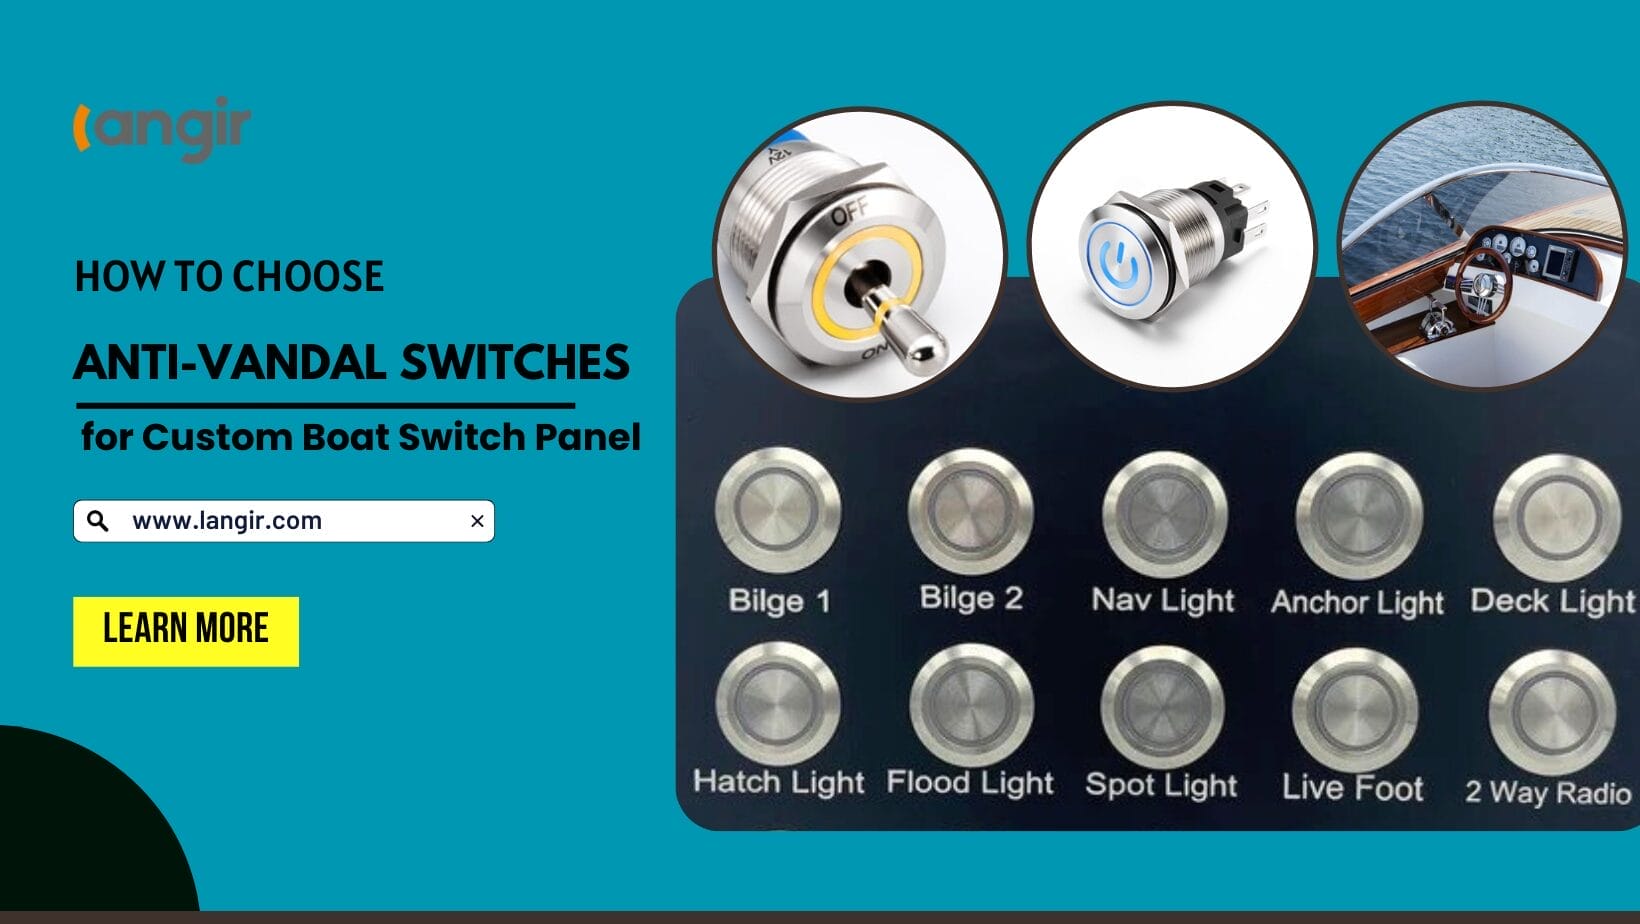 How to Choose Anti-Vandal Switches for Your Custom Boat Switch Panel - Langir